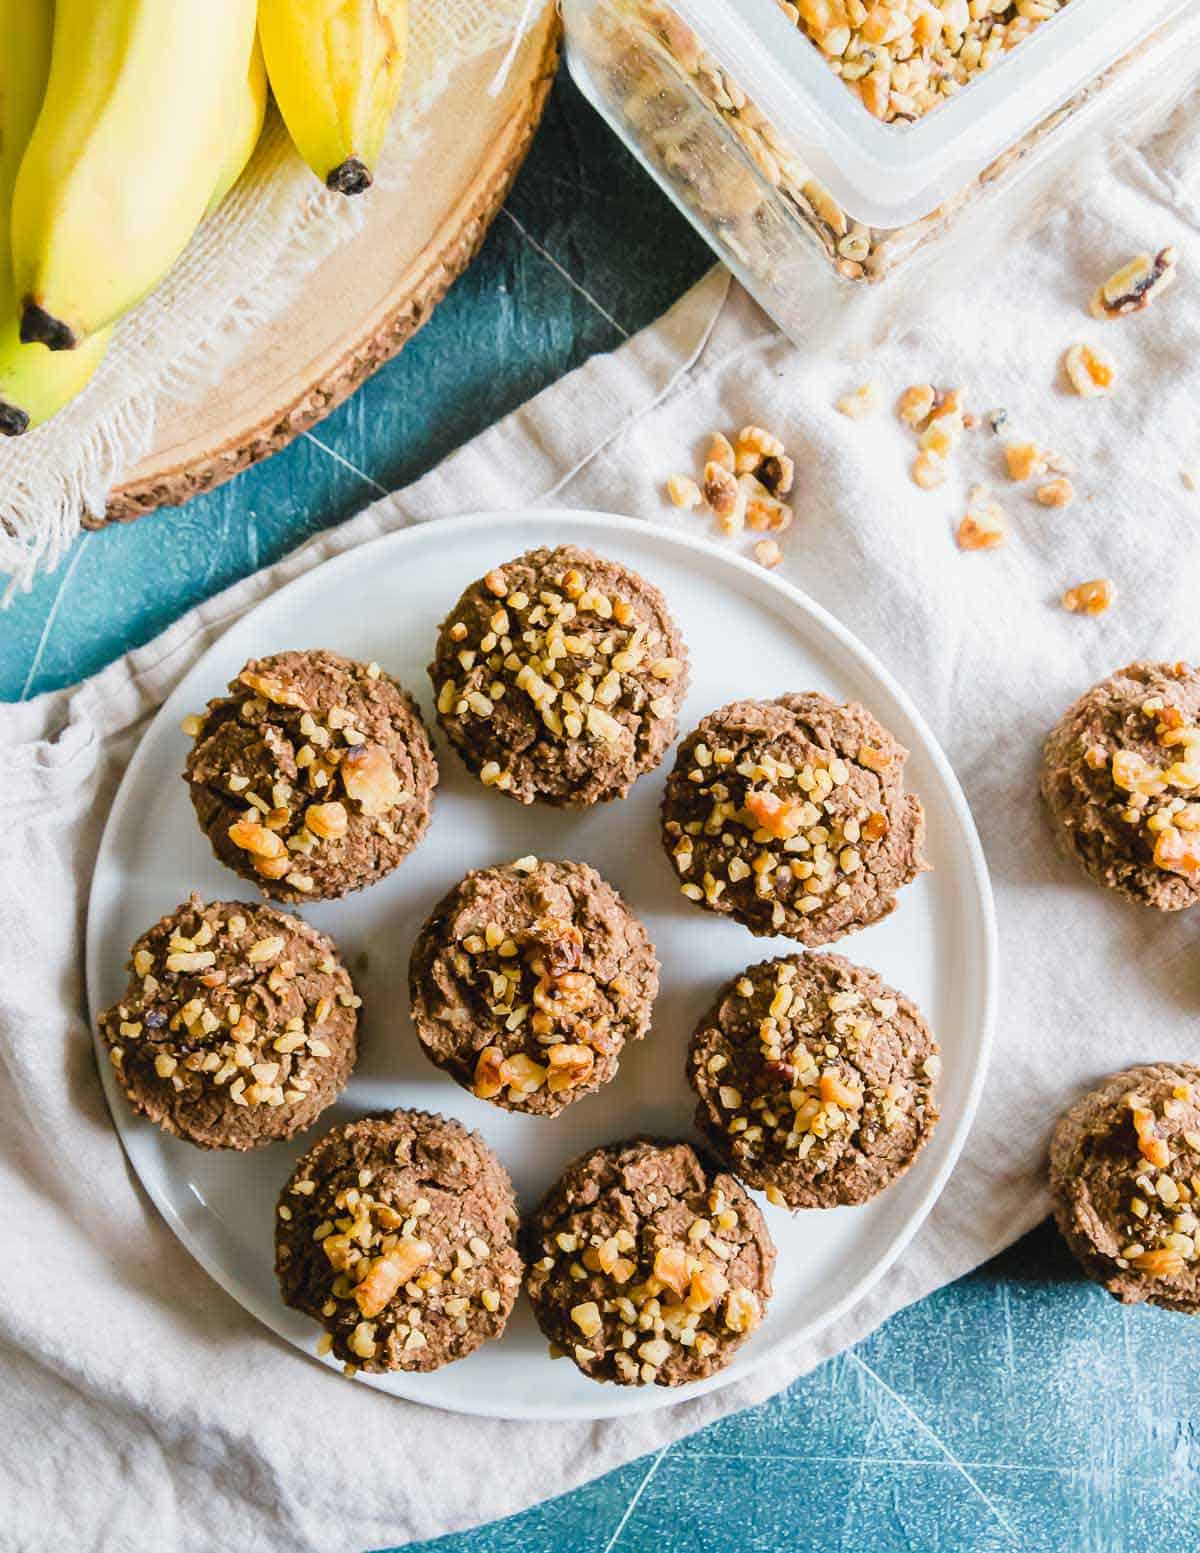 Nutty, slightly sweet and tender almond pulp muffins are the perfect way to use leftover almond pulp from making almond milk at home.